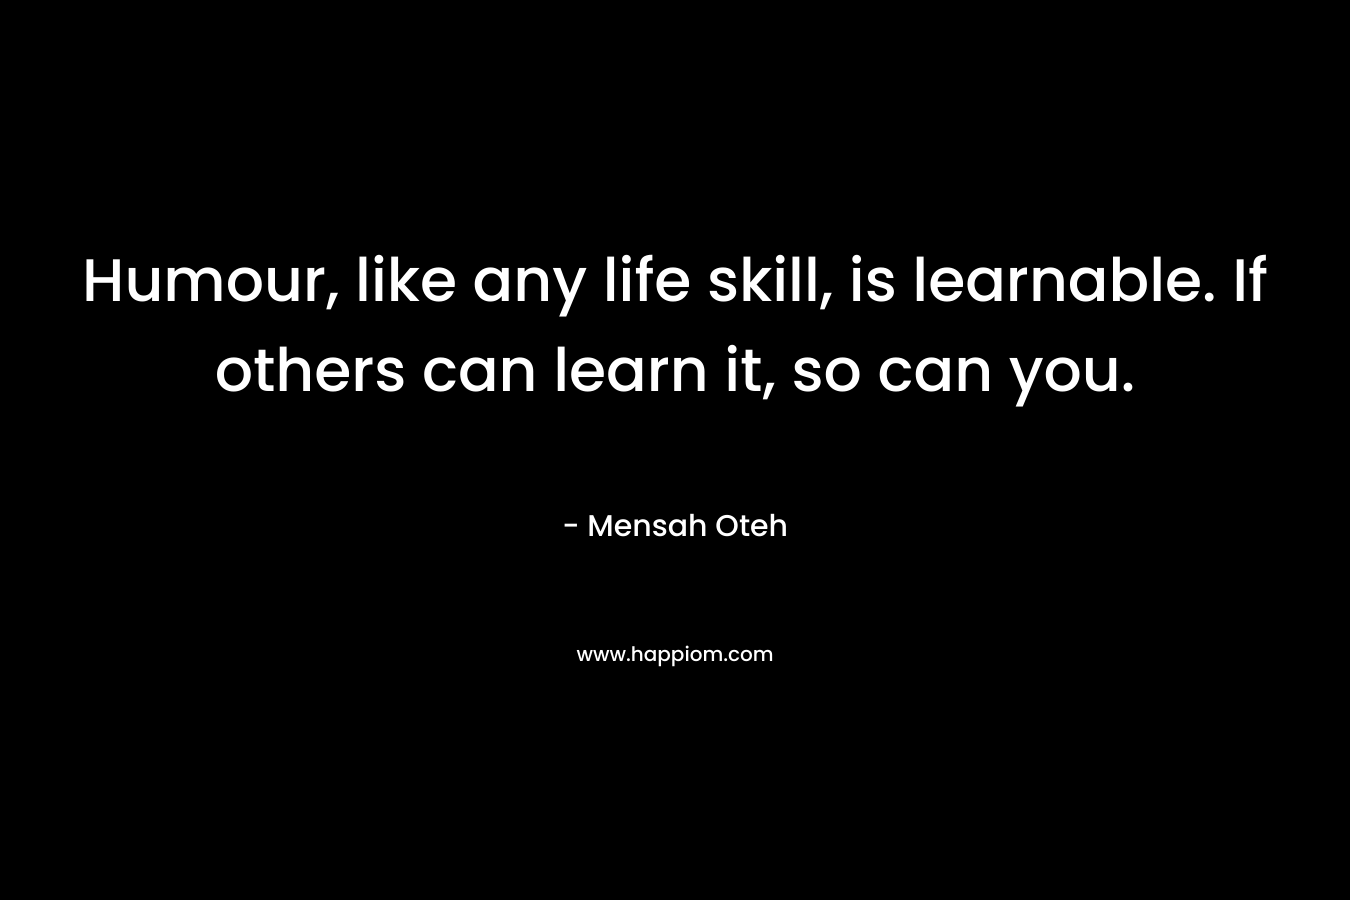 Humour, like any life skill, is learnable. If others can learn it, so can you.